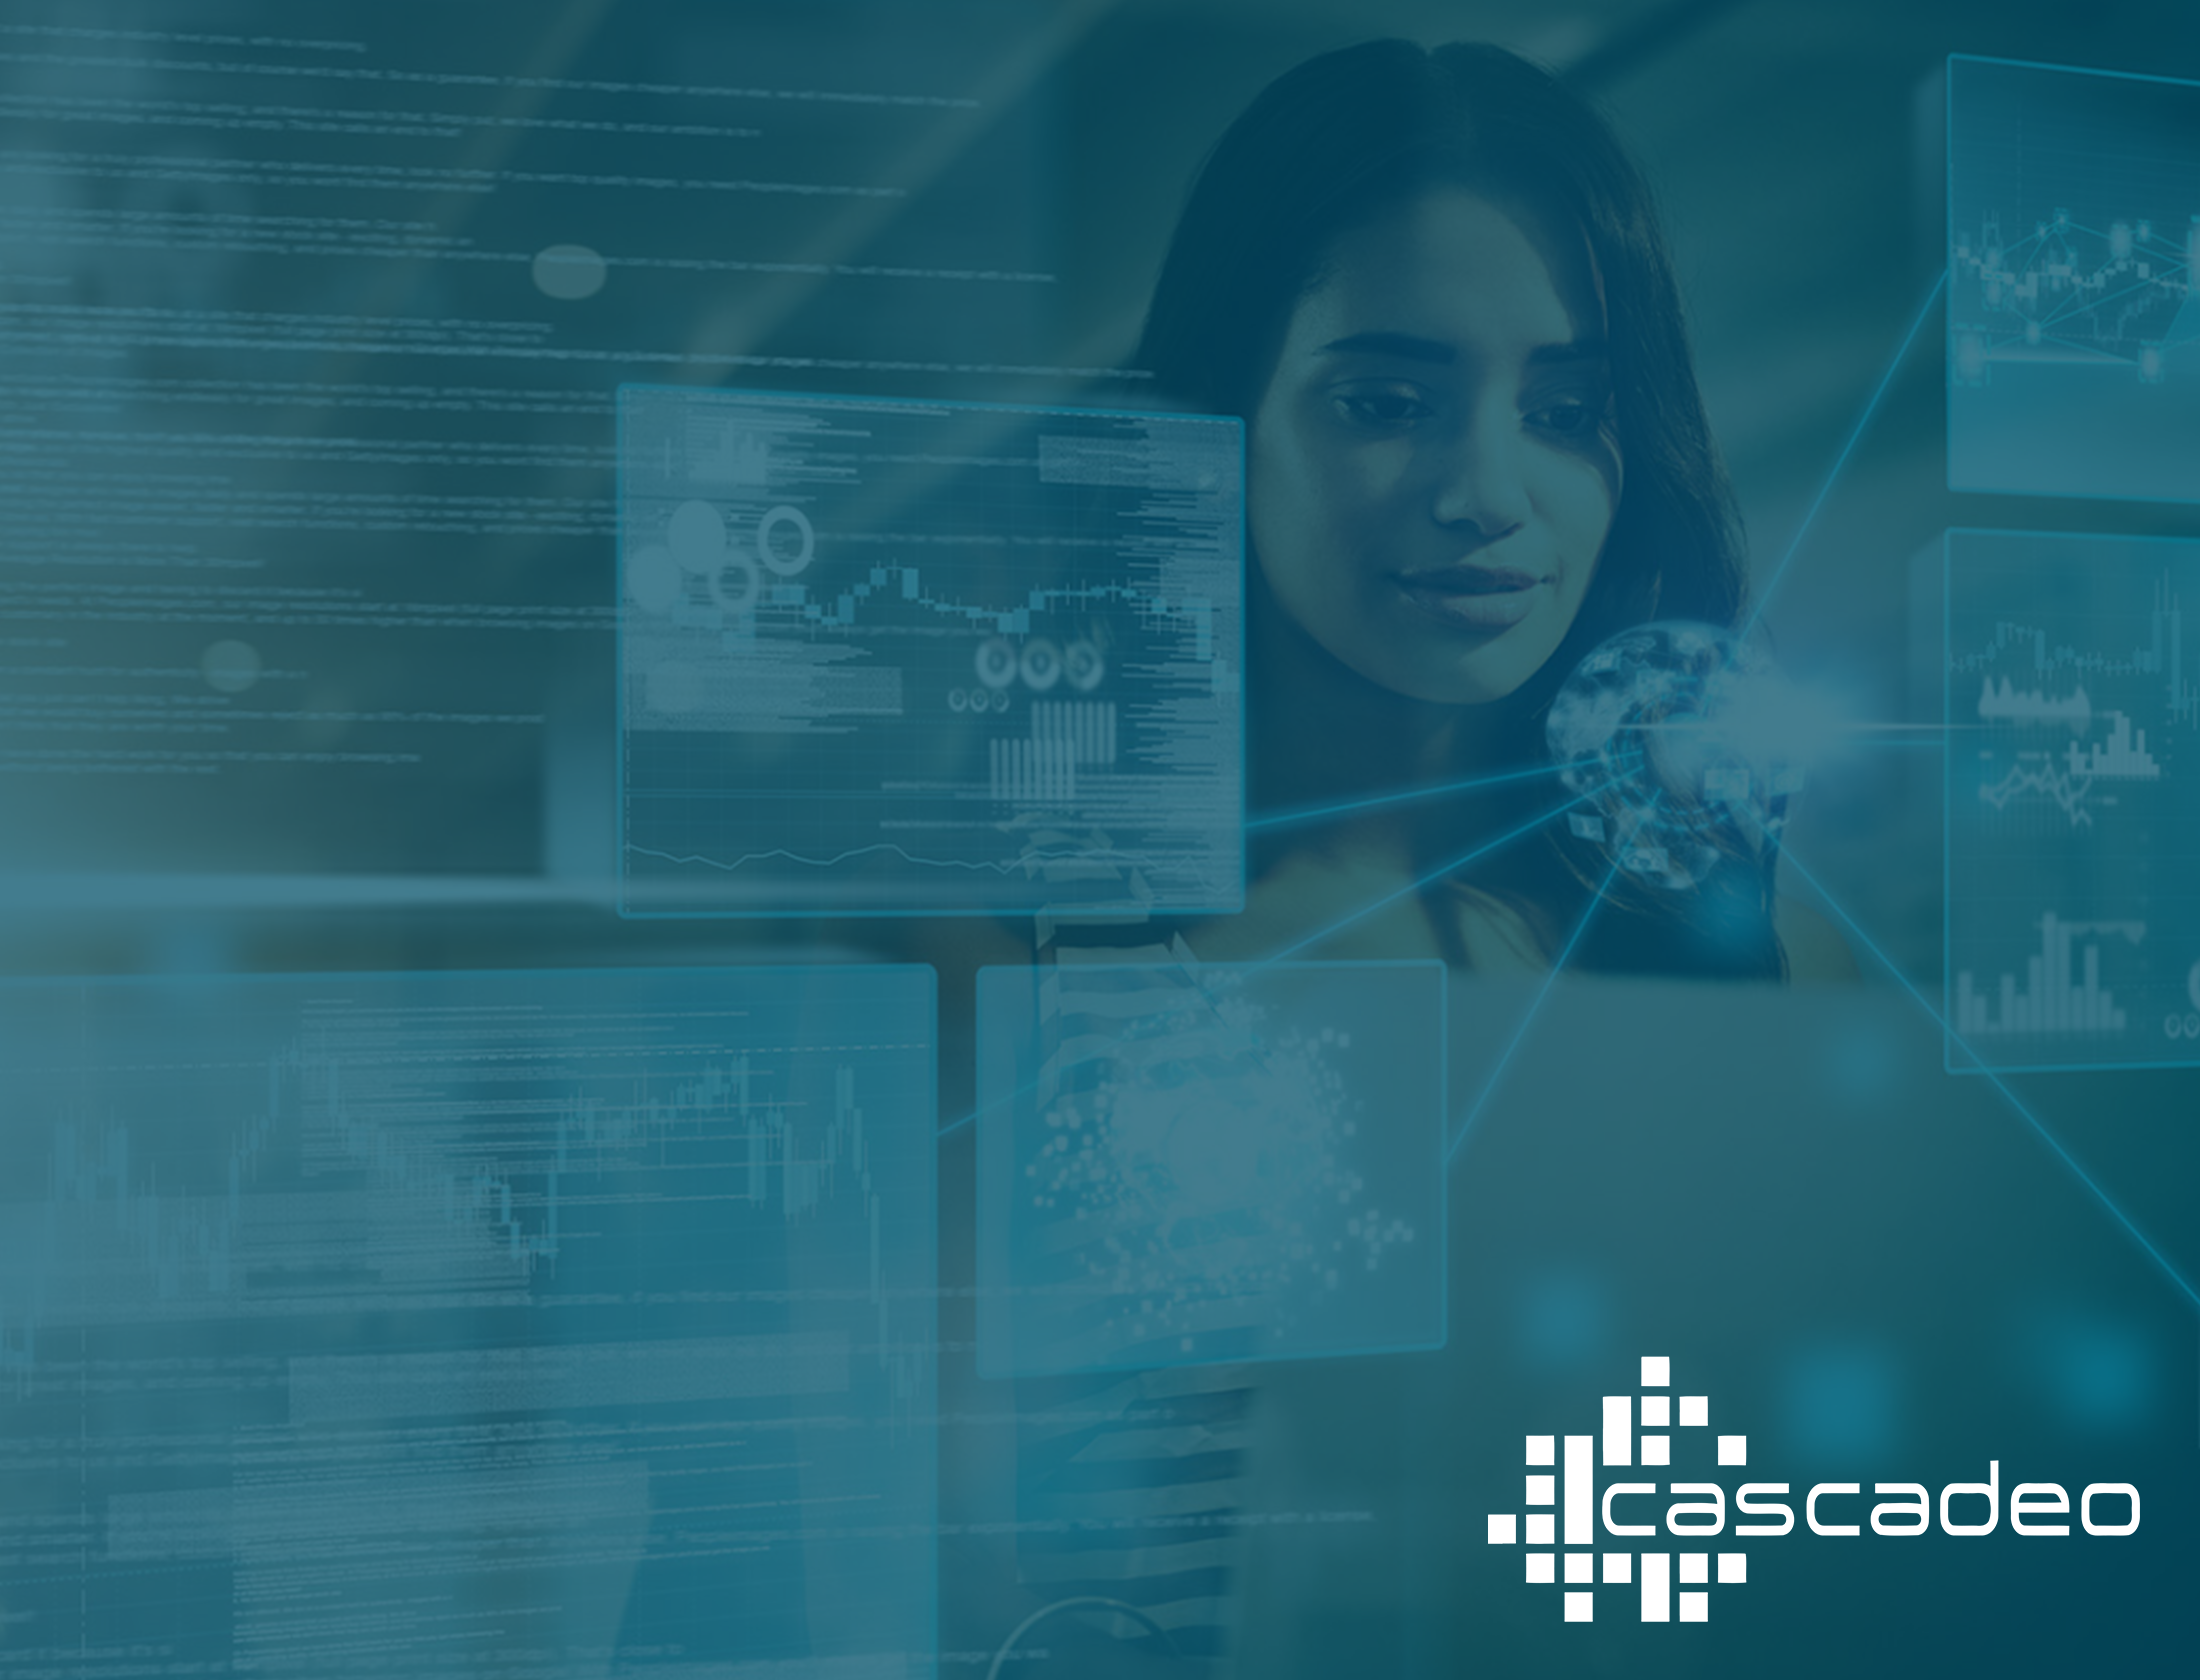 Decorative image of a woman cloud engineer working behind a blue overlay with the Cascadeo logo in white in the lower right corner.